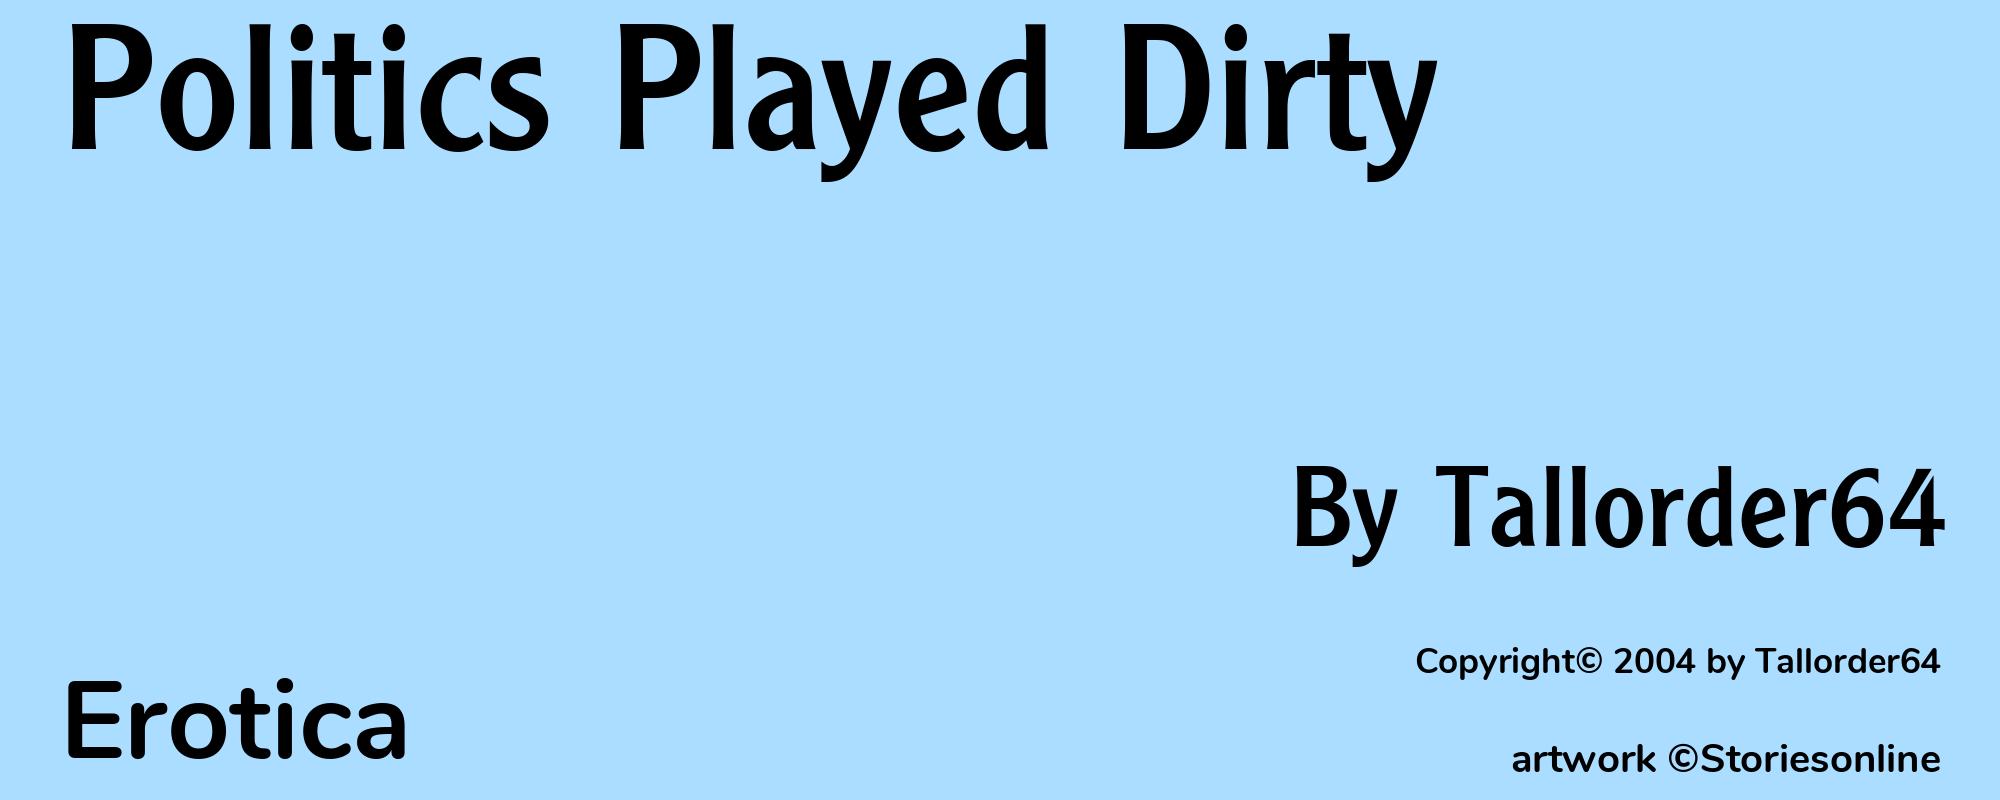 Politics Played Dirty - Cover